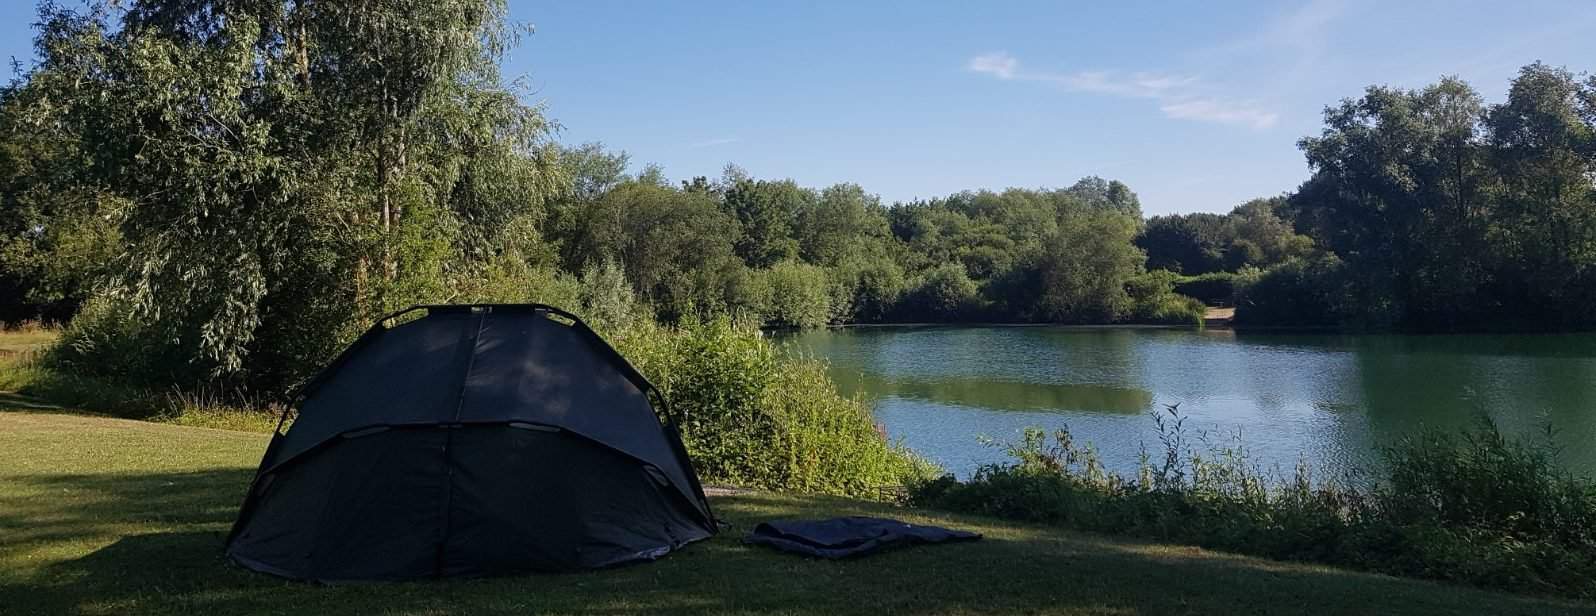 What Do I Need For Carp Fishing? – A Beginners Guide